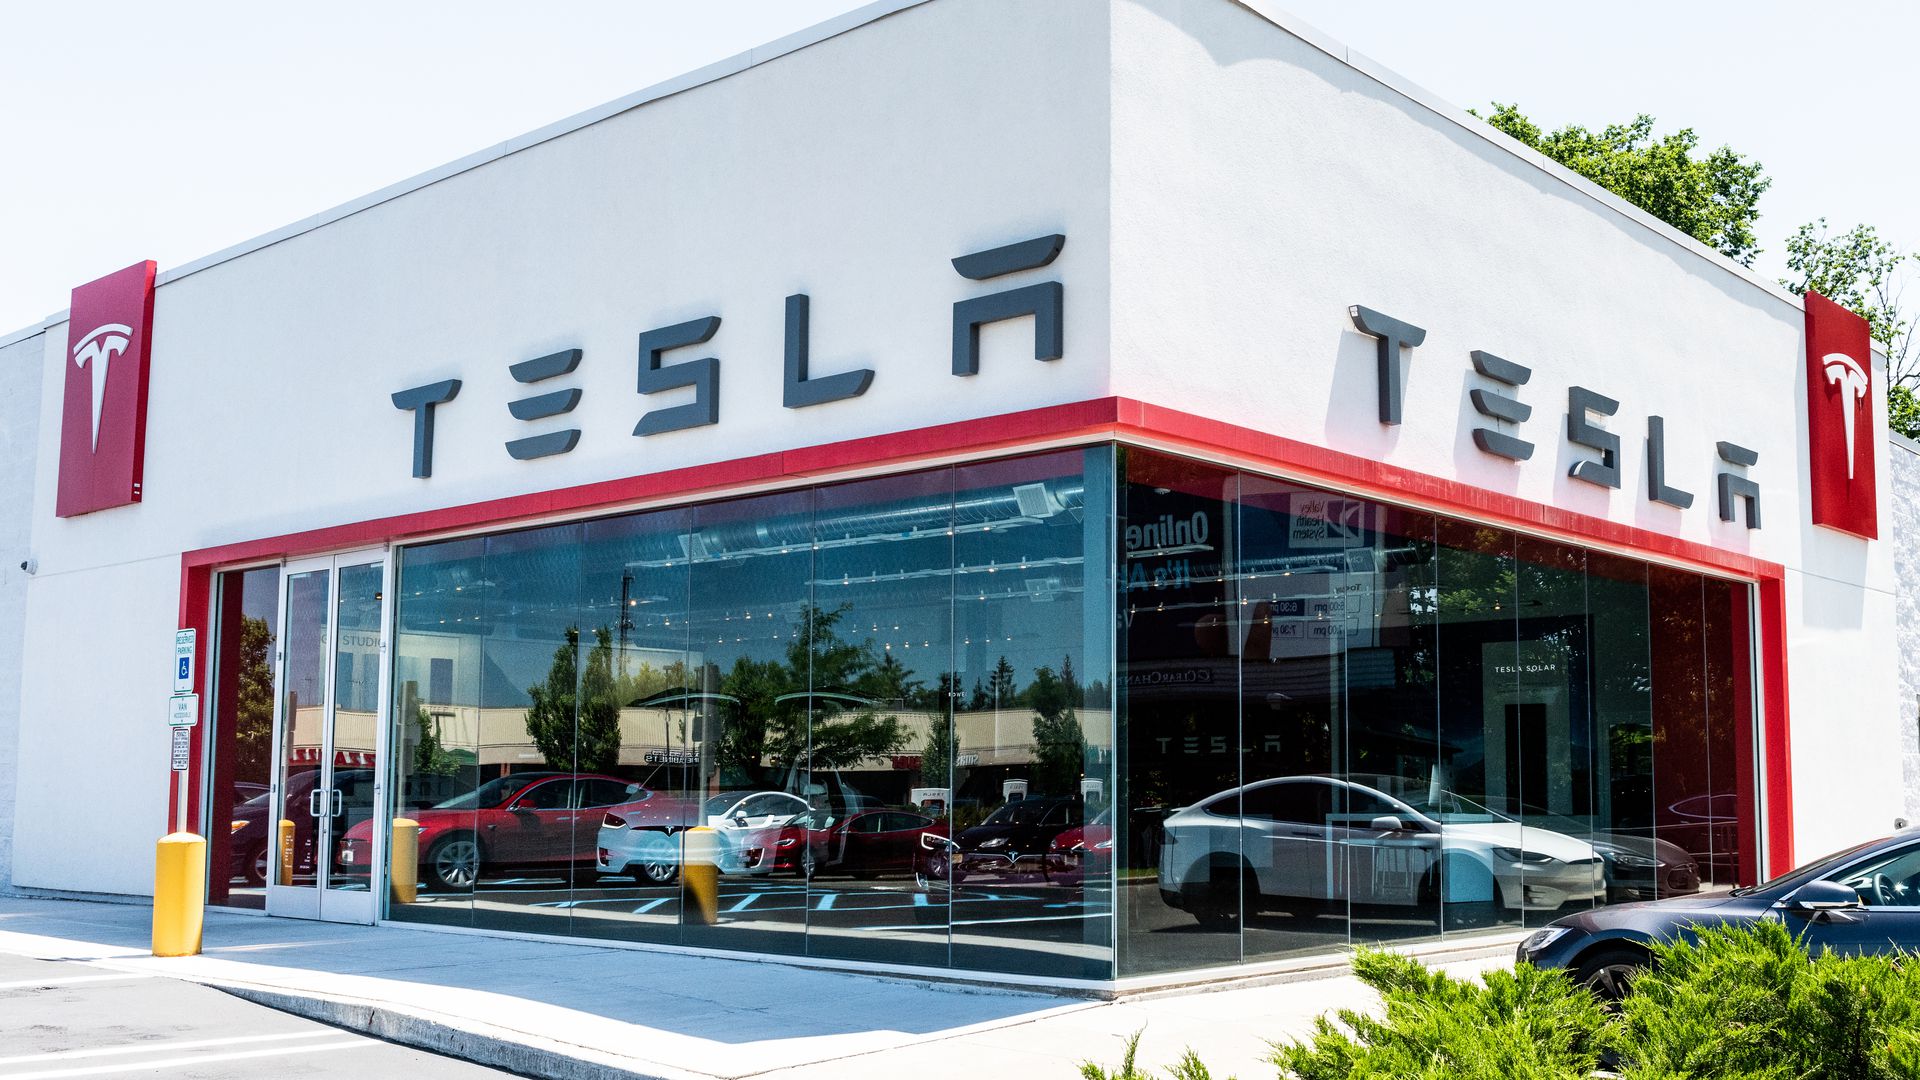 Tesla Begins Recruitment for Sales Positions to Launch Israeli Market Likely 1H 2021